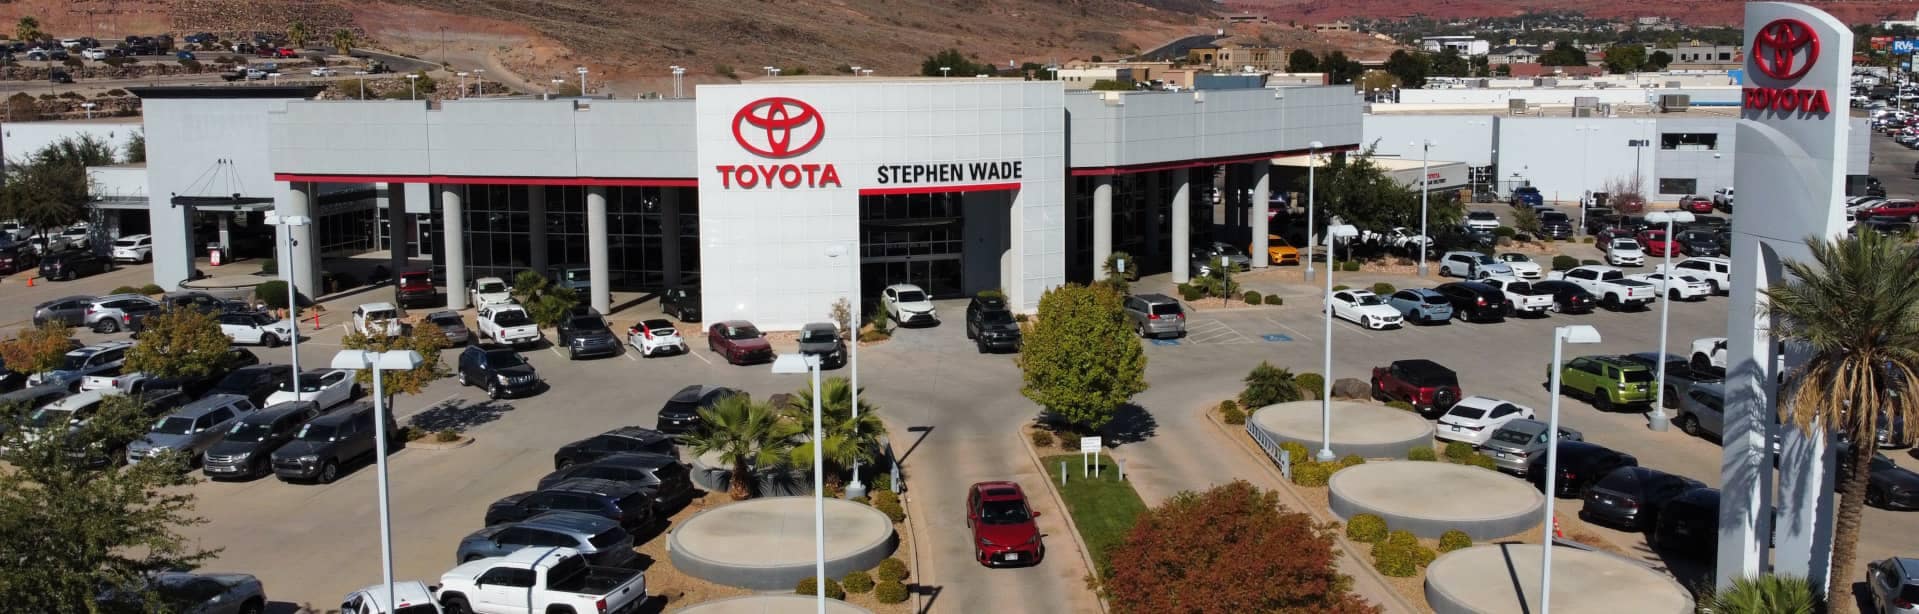 Stephen-Wade-Toyota-dealership-aerial-view-corrected